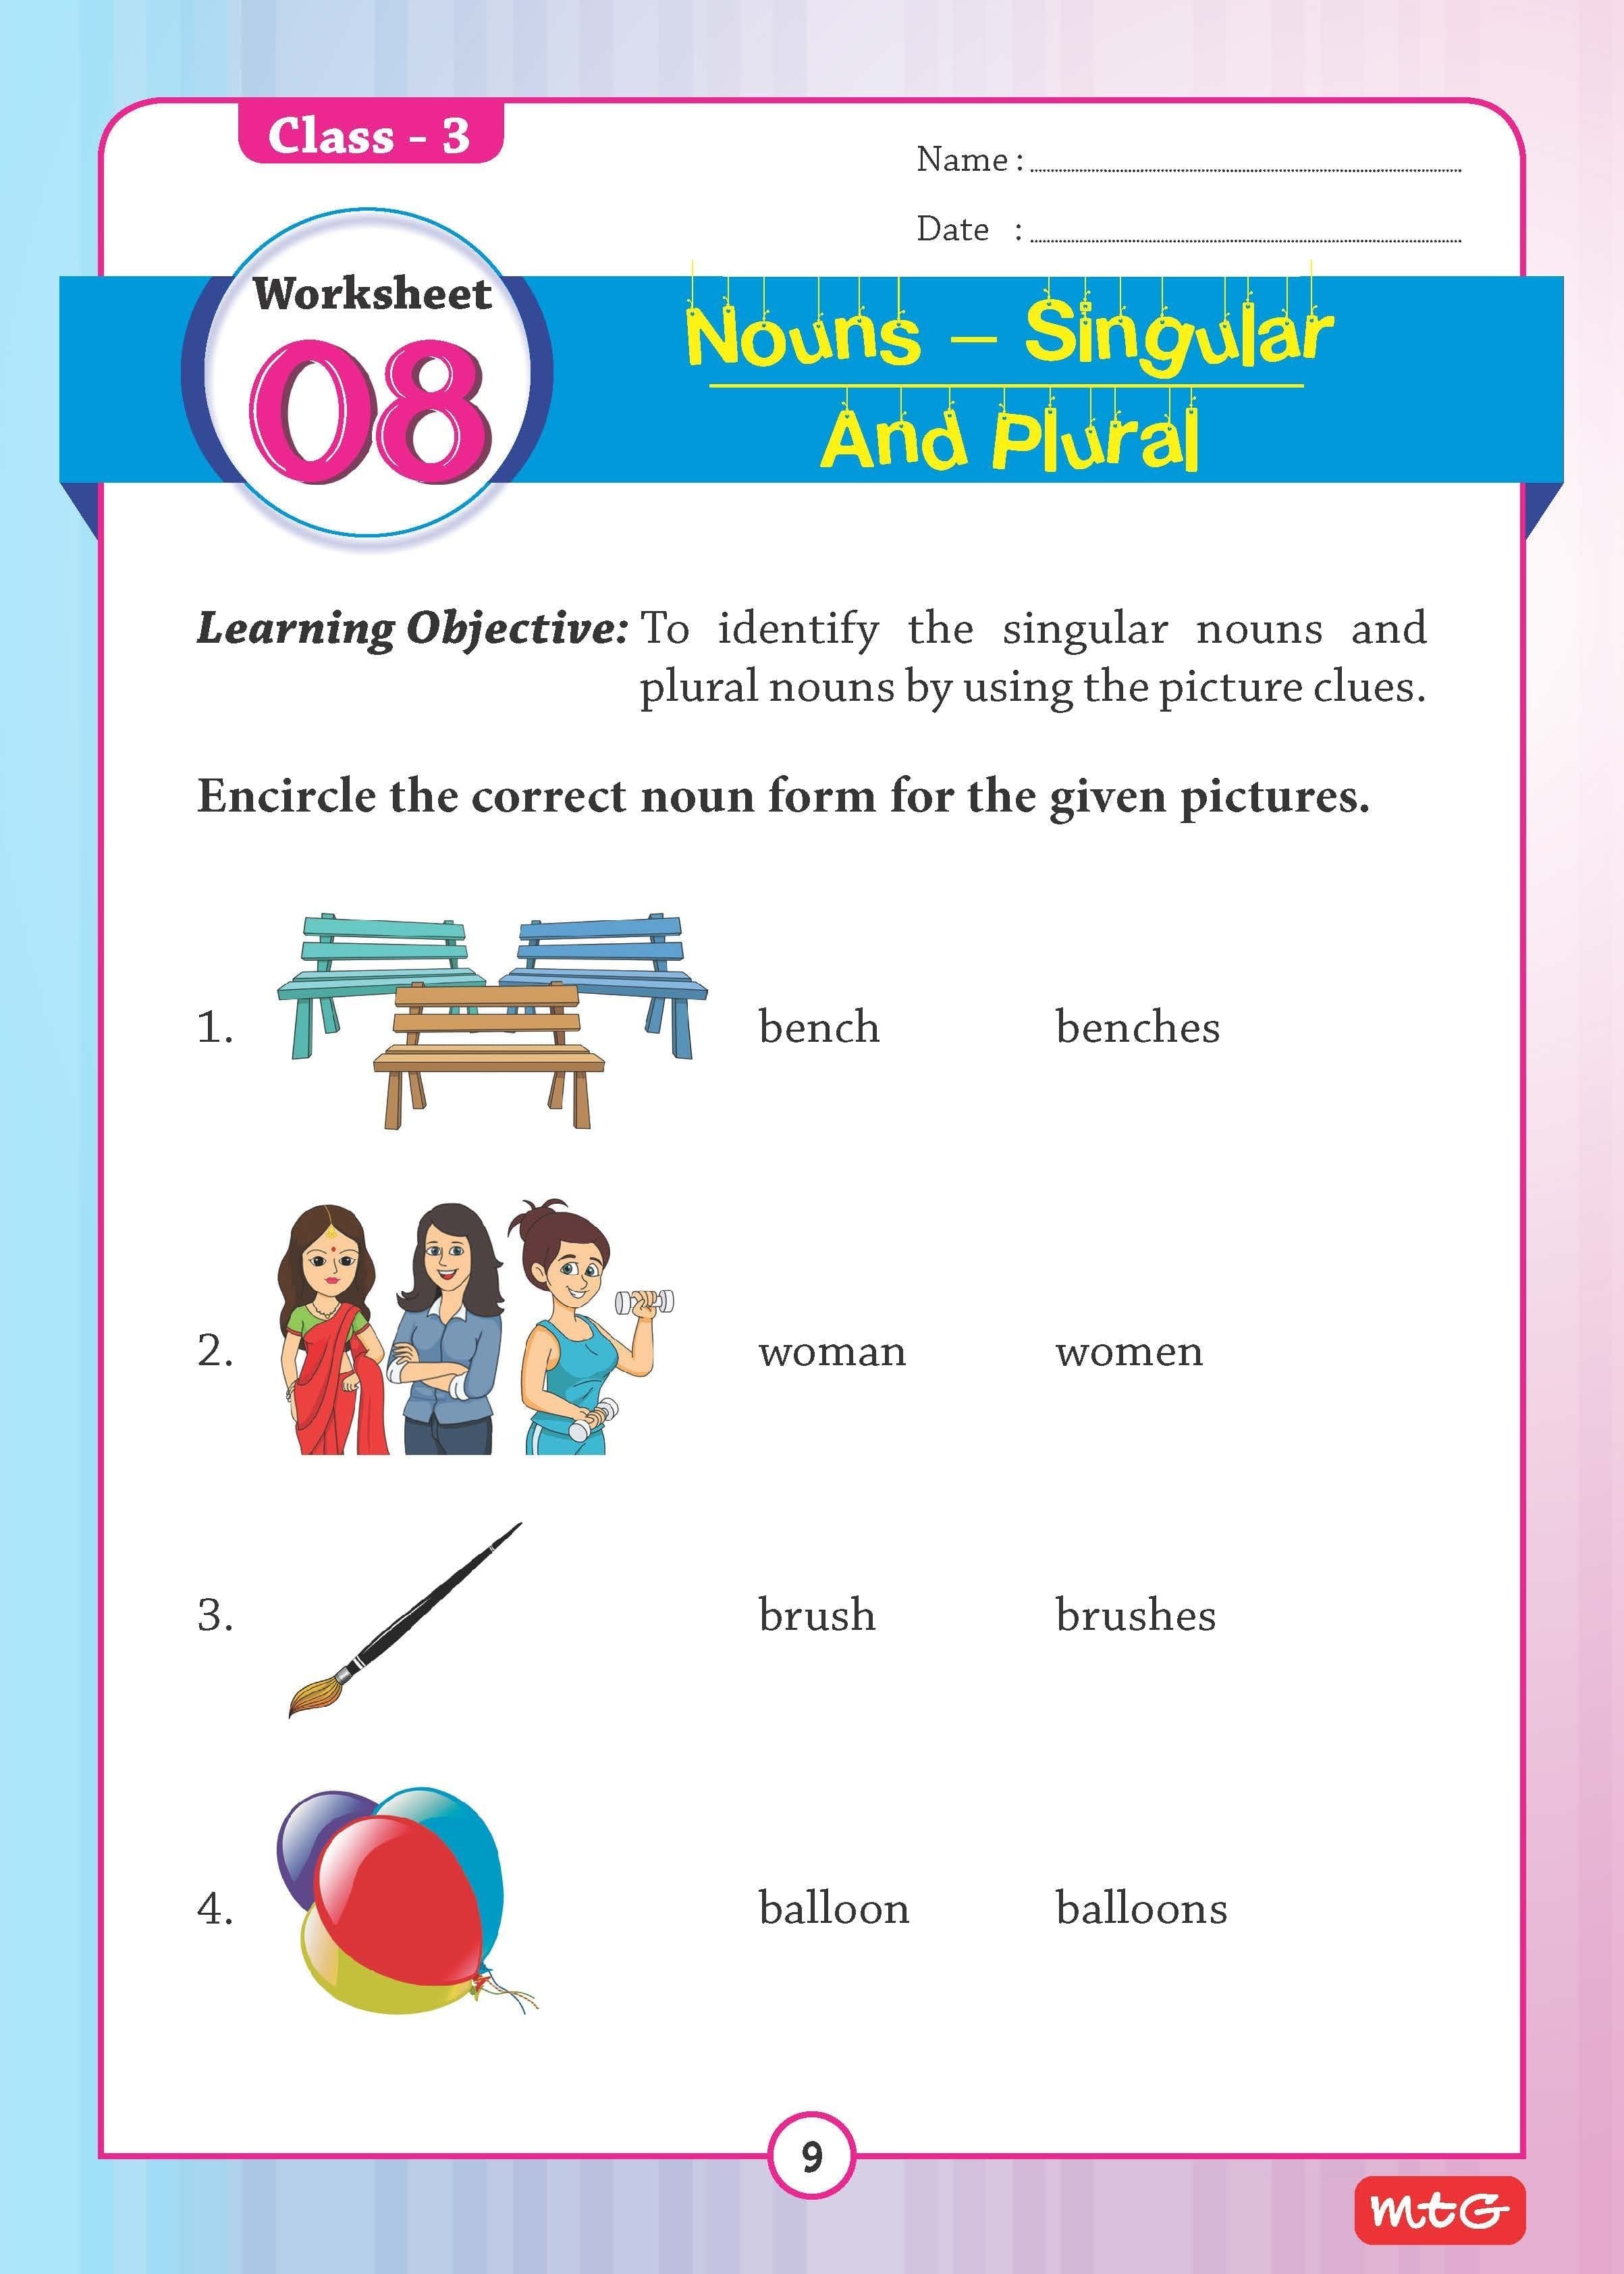 51-english-grammar-worksheets-class-3-instant-downloadable-for-3rd